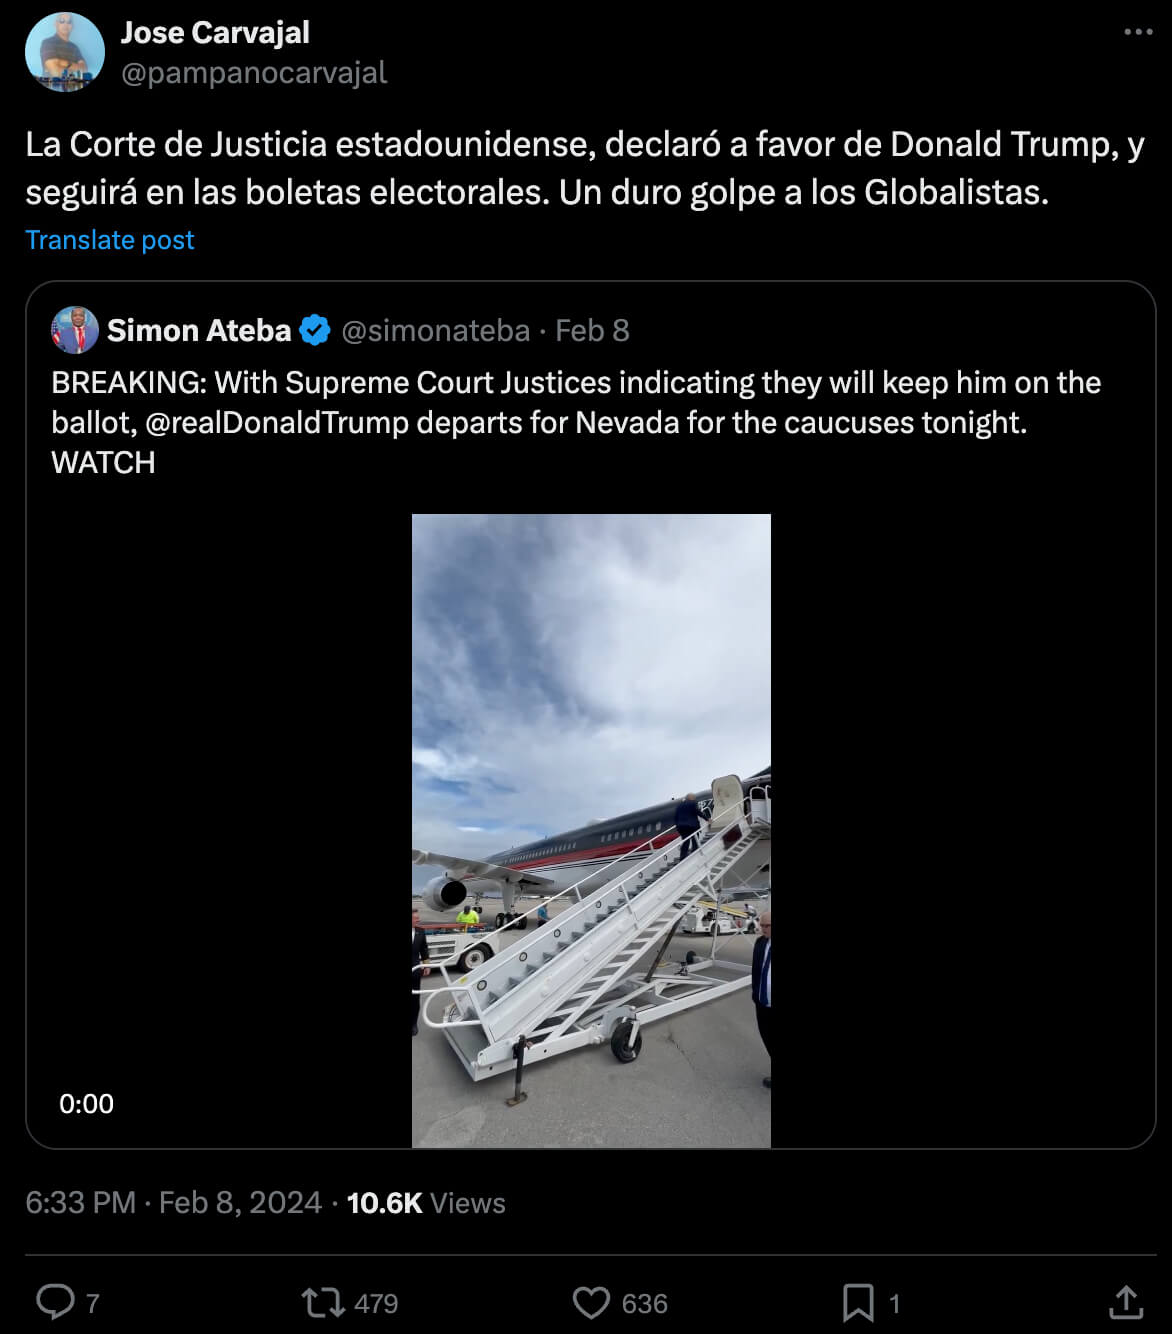 Chinese state media spread Spanish-language disinformation that the U.S. Supreme Court has already ruled that POTUS 45 is eligible to run in the 2024 presidential election